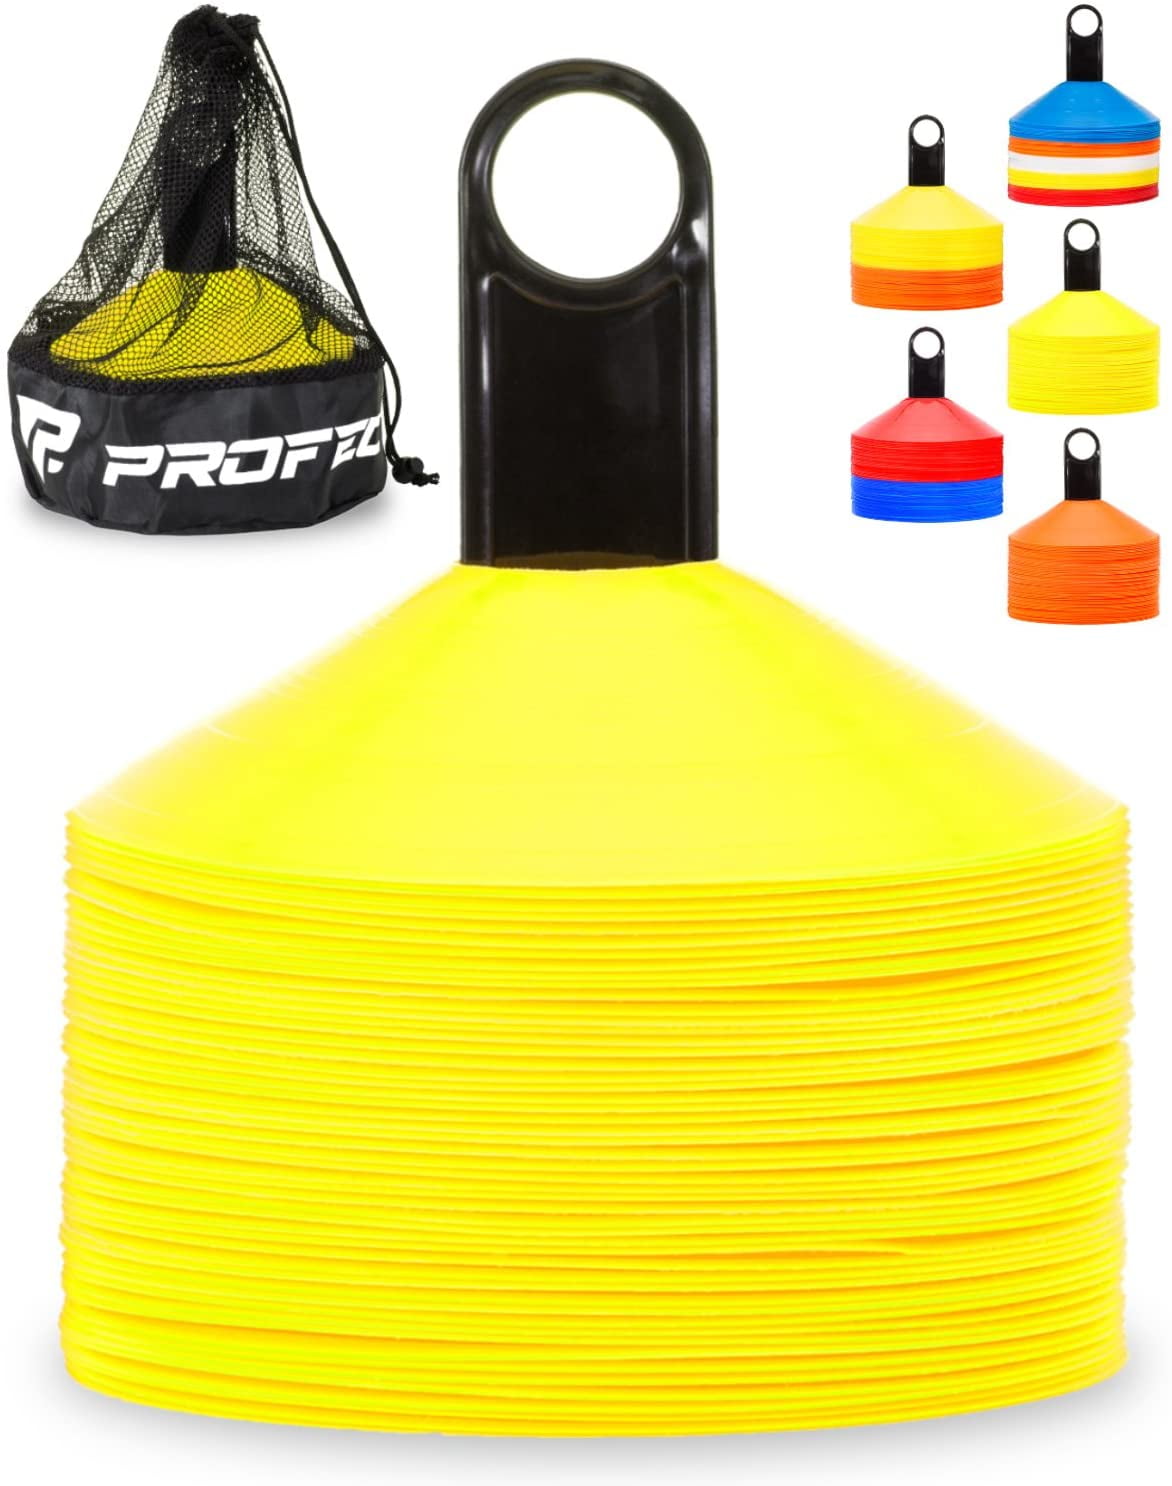 Pop up training cone safety plastic cones markers pitch agility x 10 